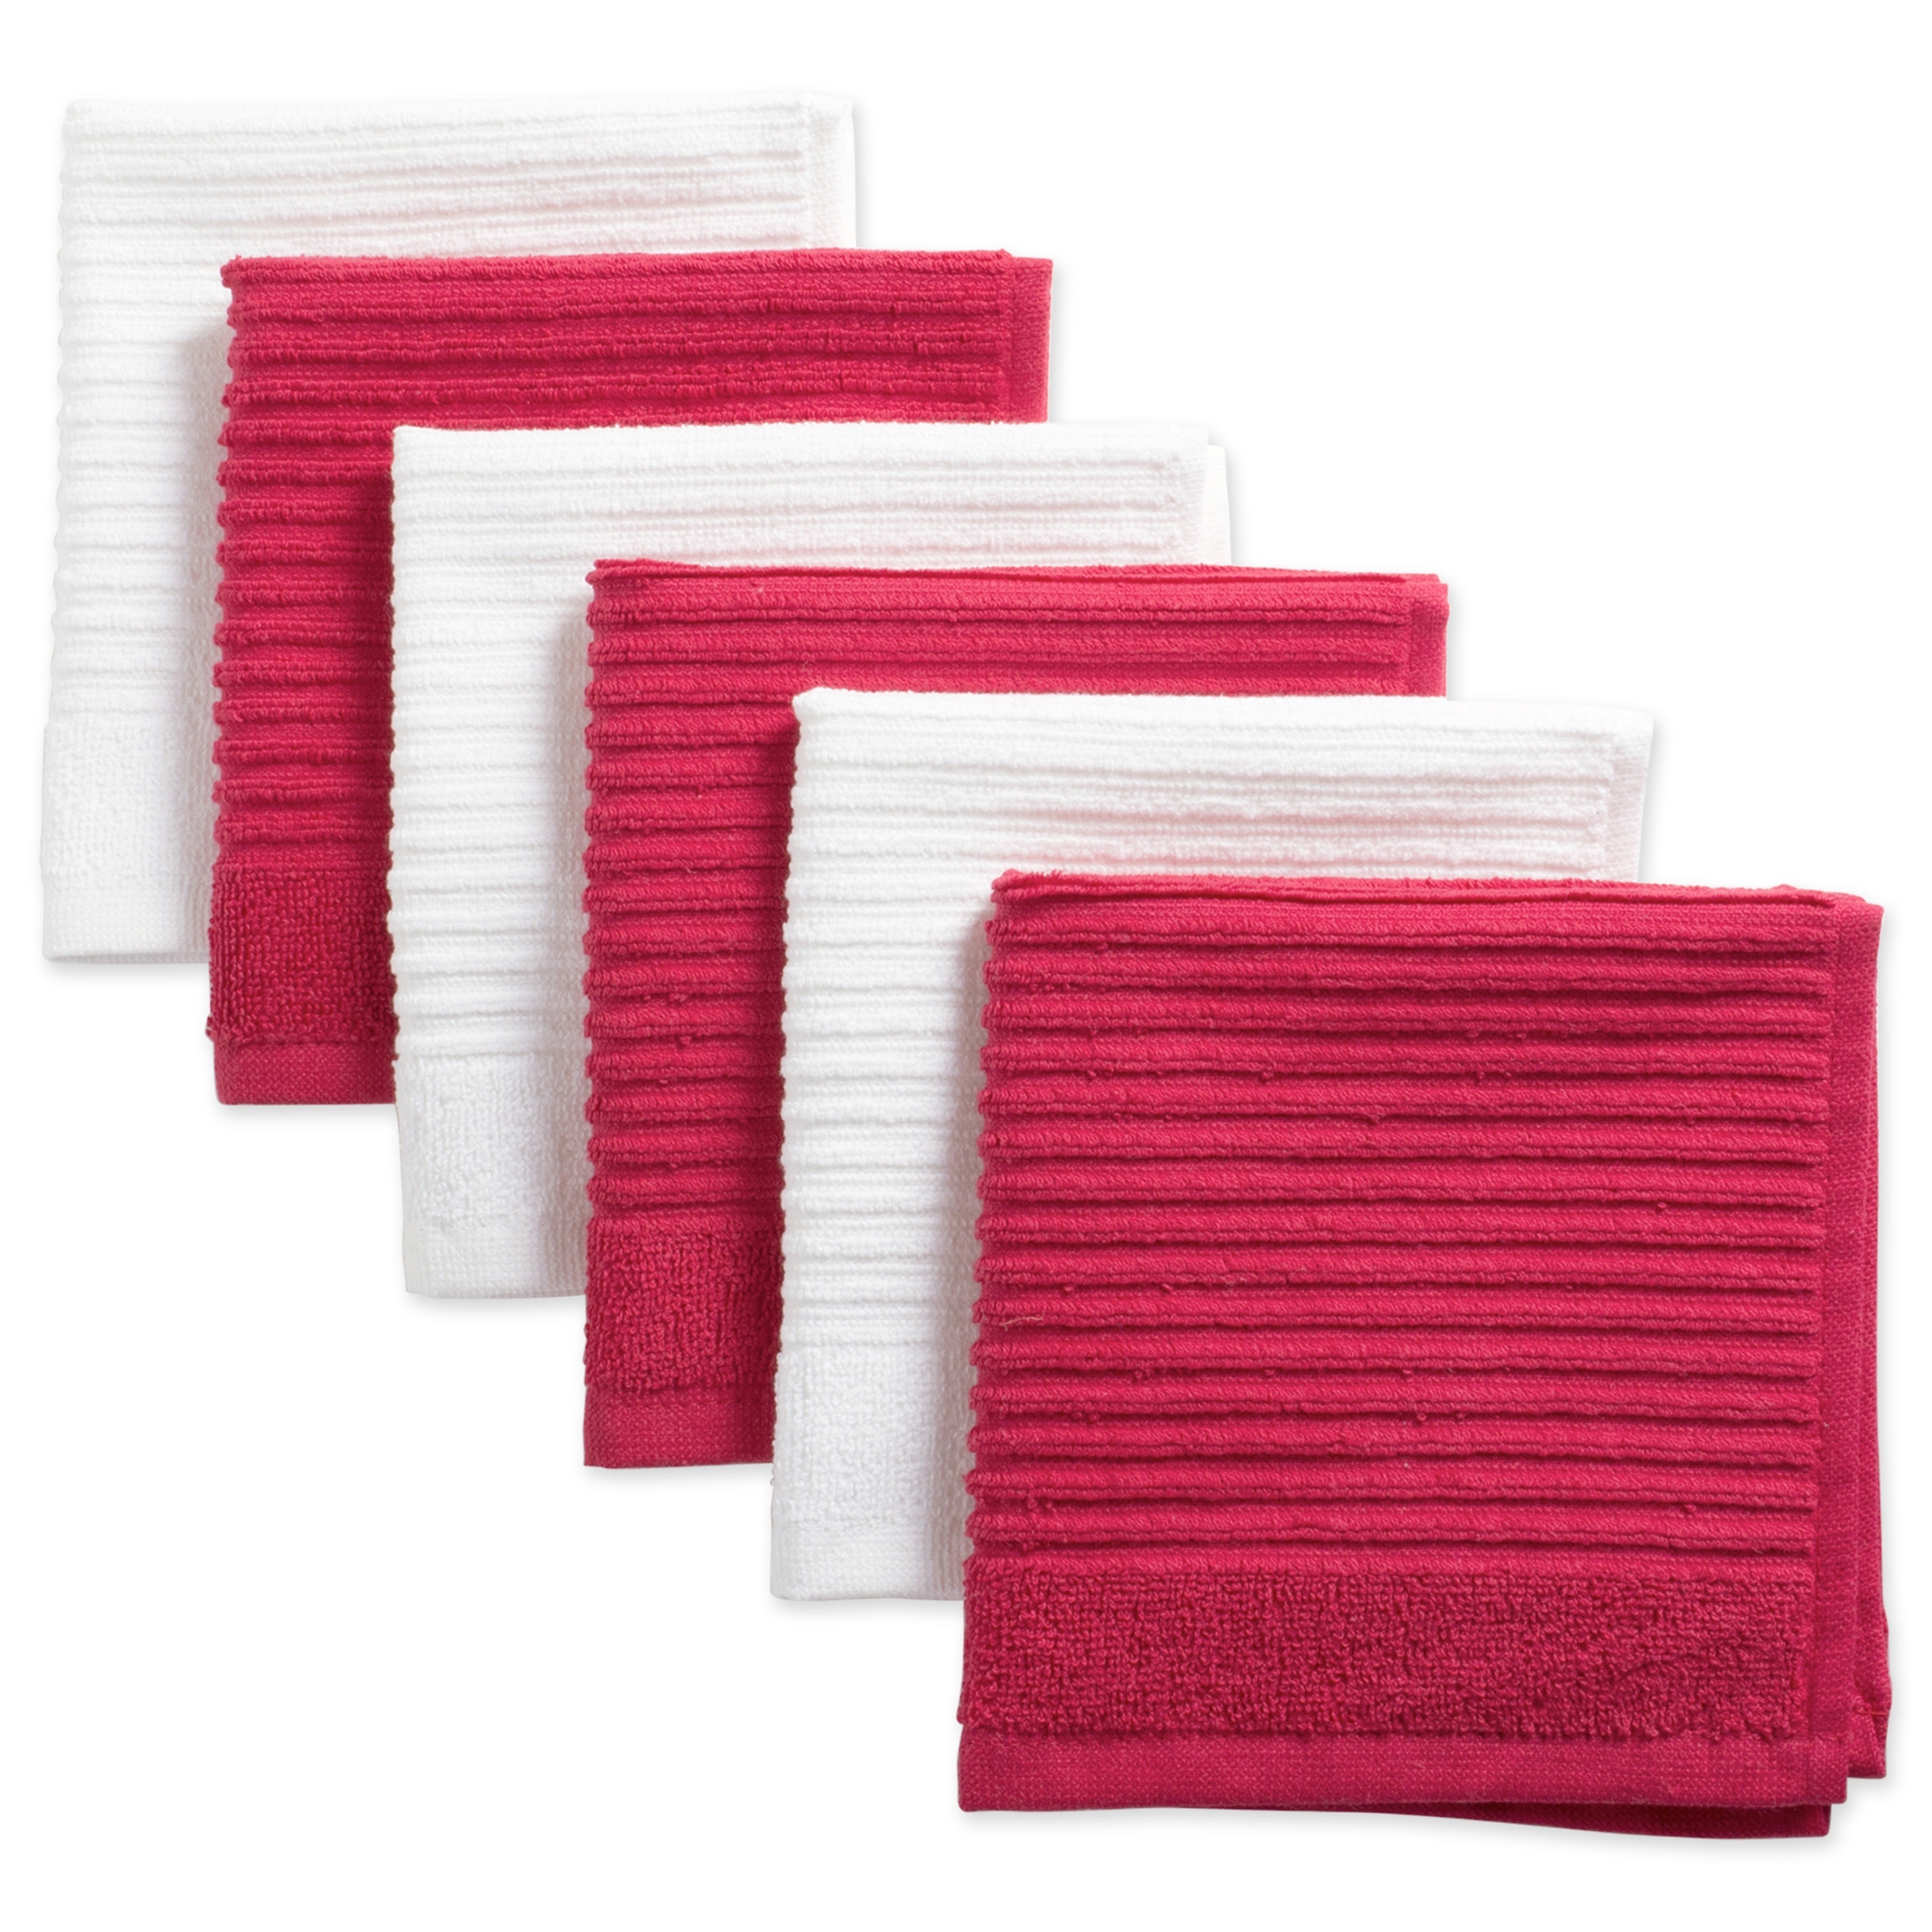 https://ak1.ostkcdn.com/images/products/21723501/Design-Imports-Assorted-Ribbed-Terry-Dishcloth-Set-of-6-12-inches-long-x-12-inches-wide-e0af419d-5562-4a08-aefd-ea3841f16cf8.jpg